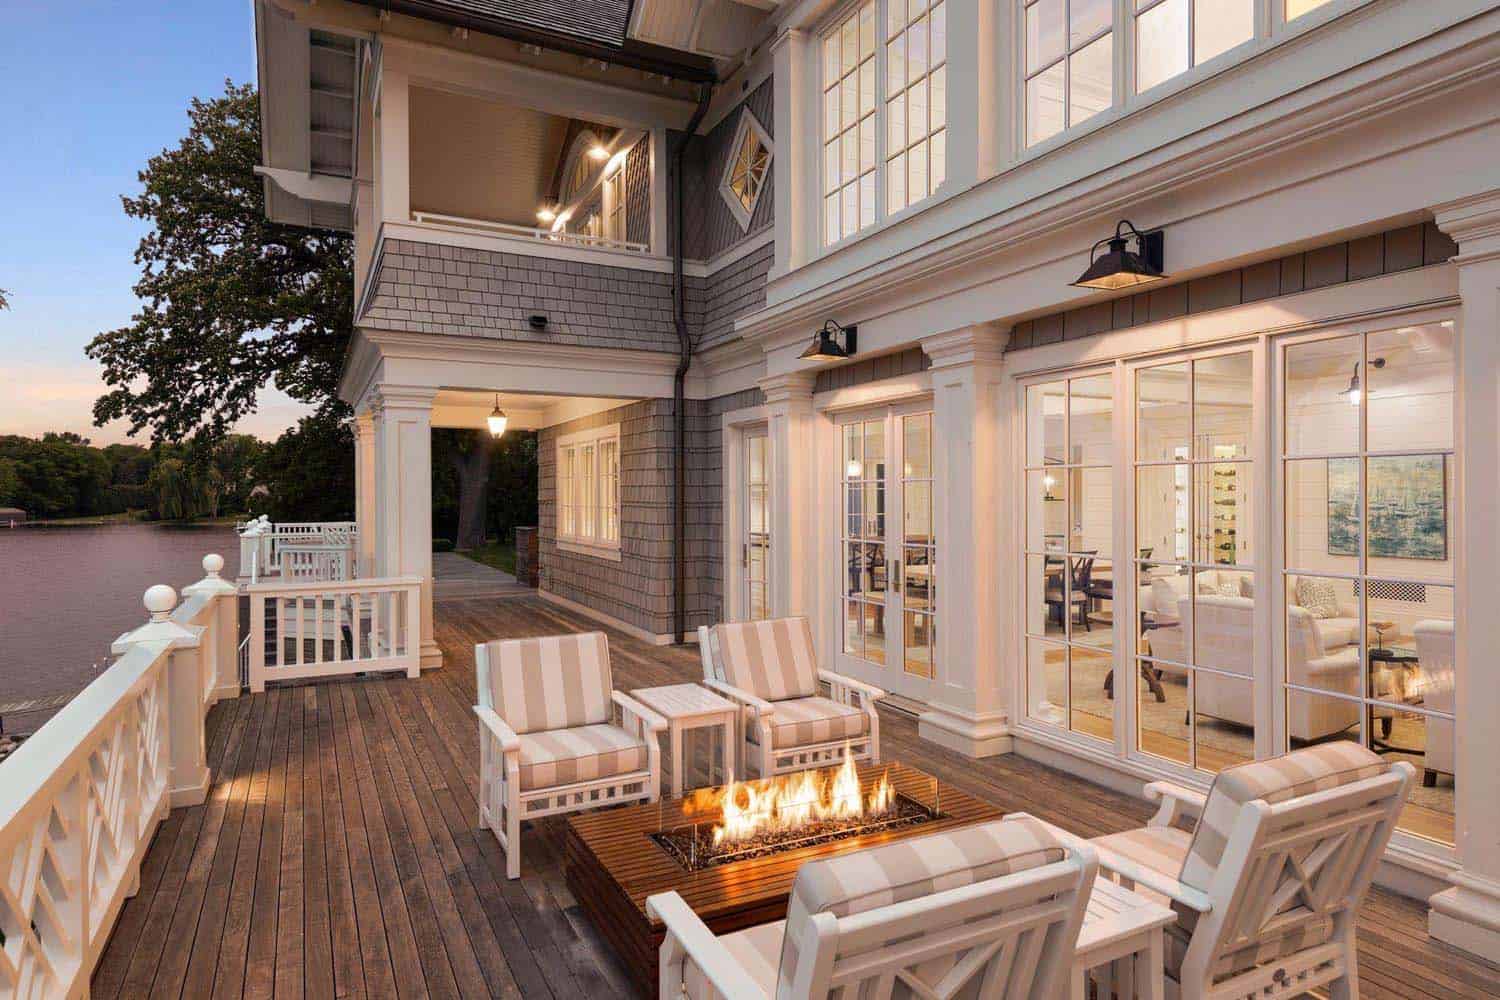 east-coast-shingle-style-lake-house-exterior-deck-with-a-fire-pit-at-dusk